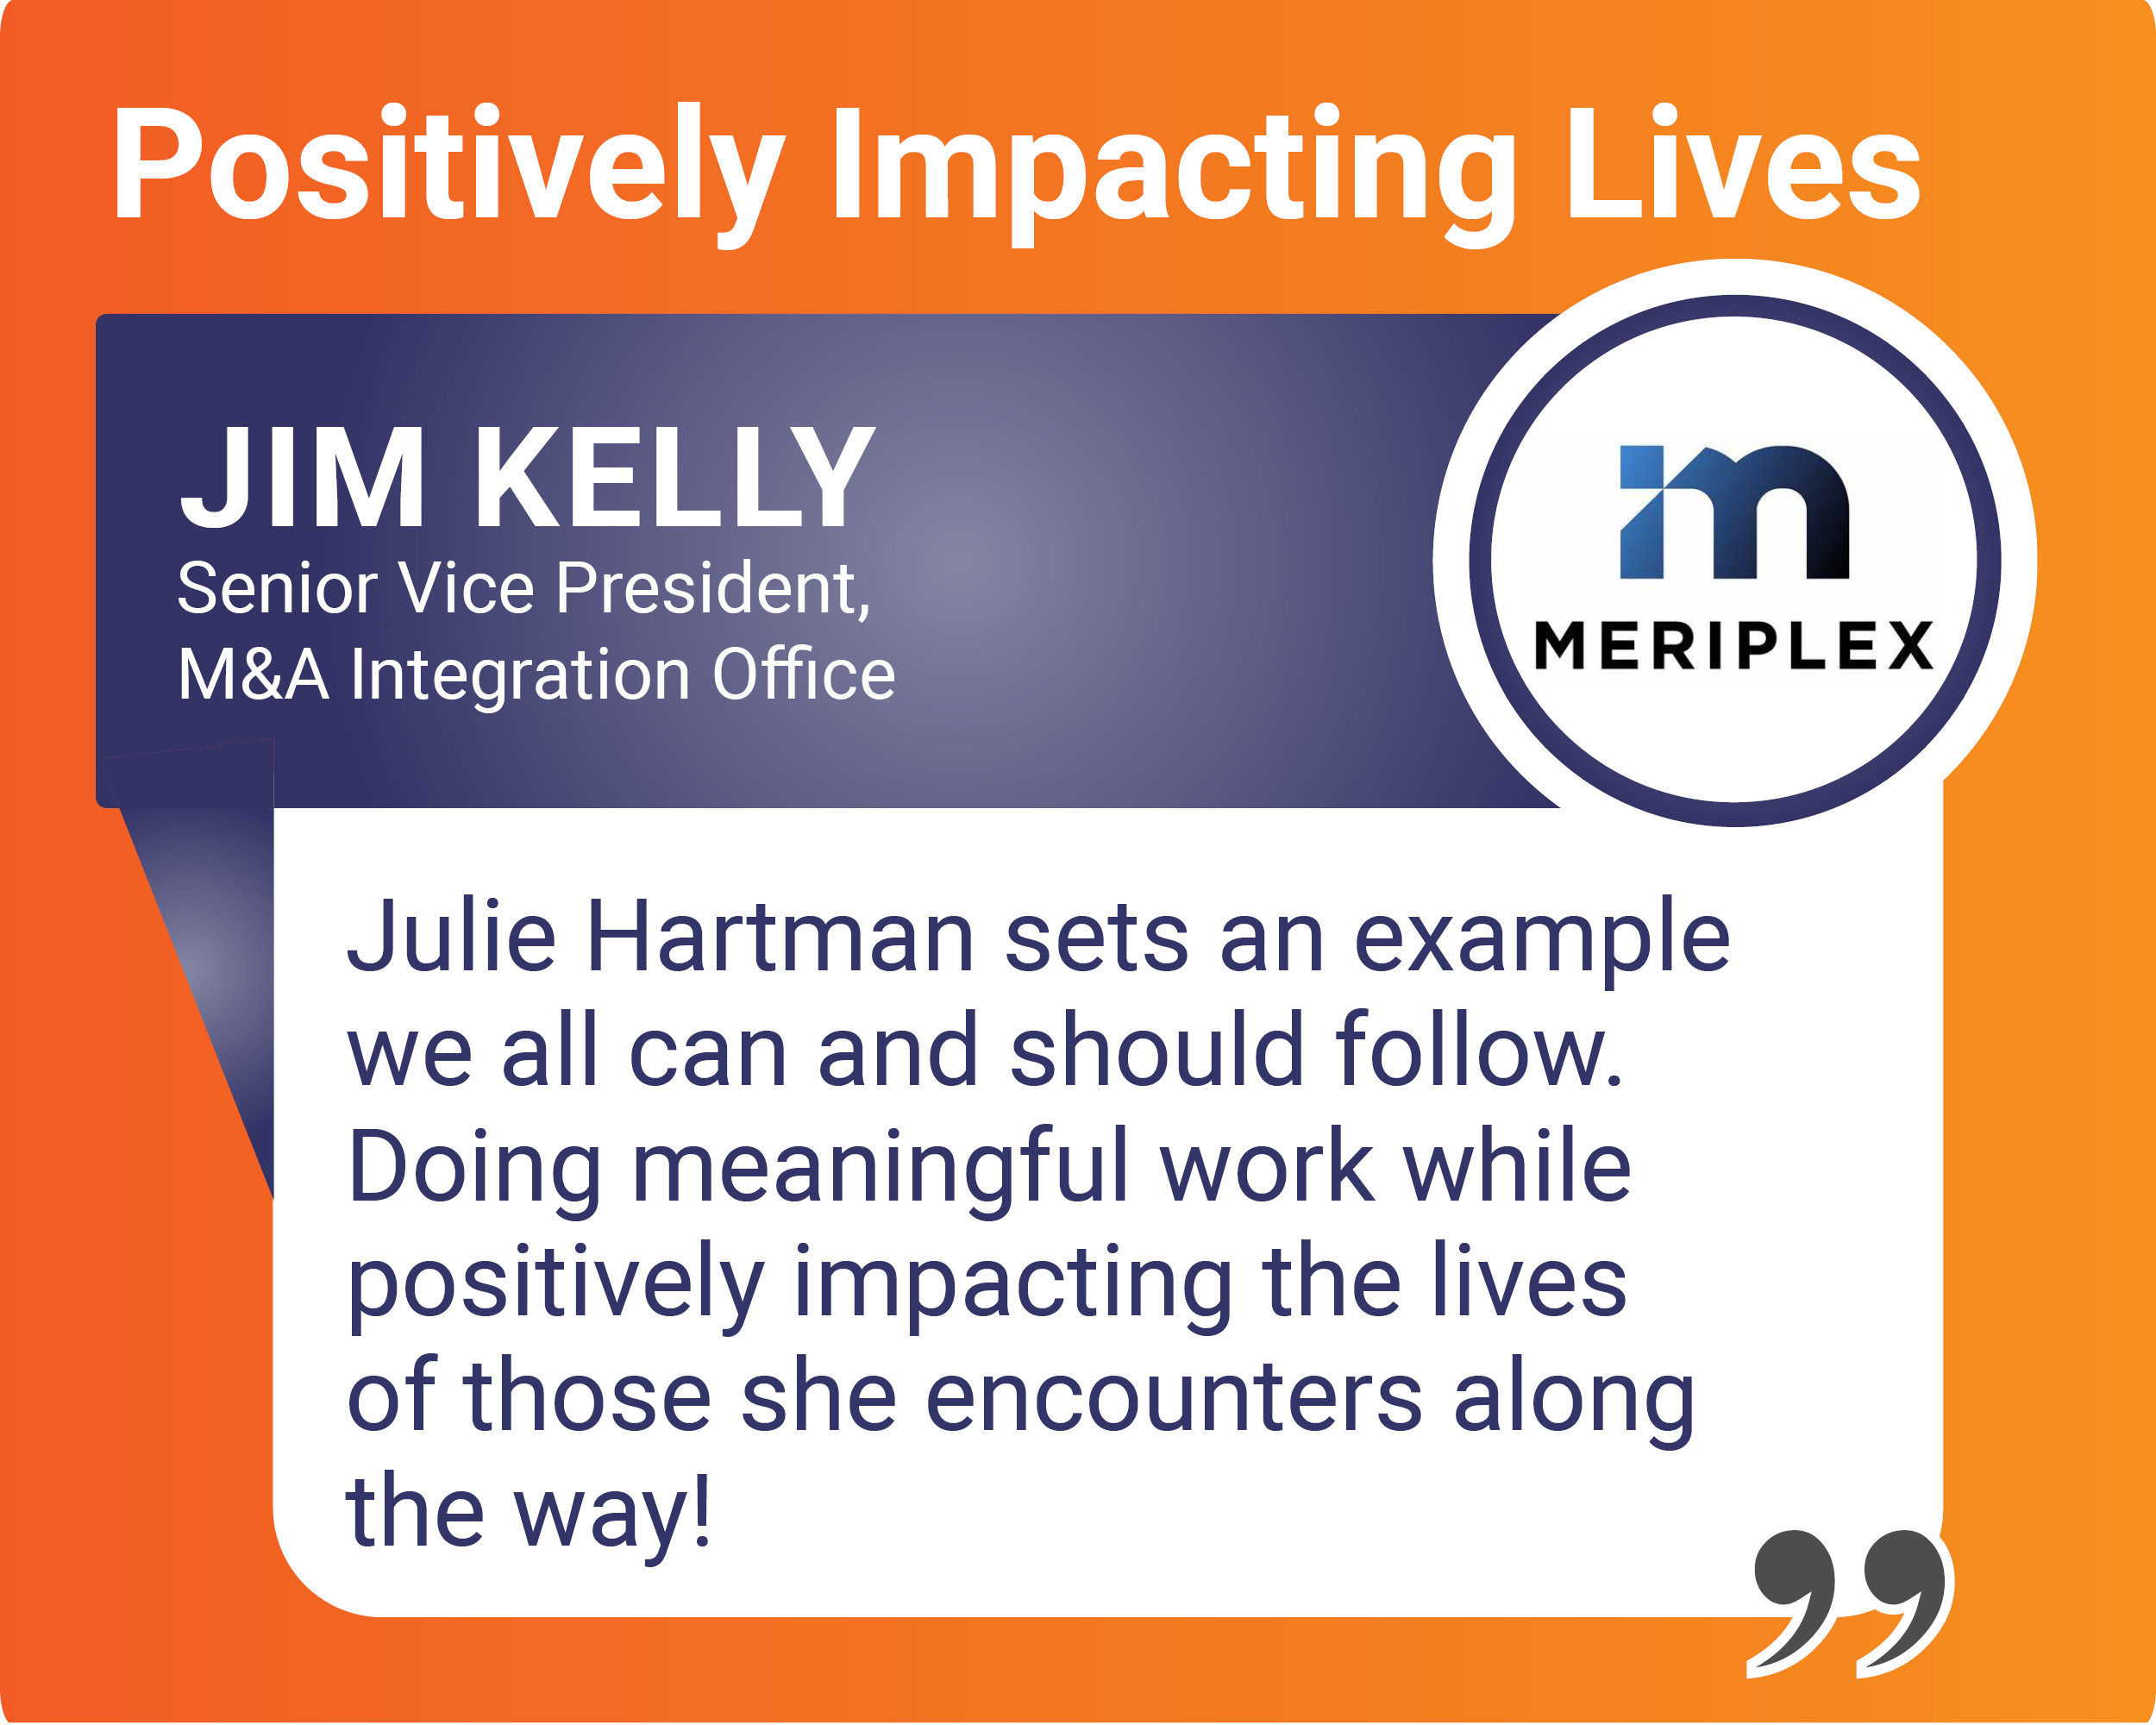 Testimonial from Jim Kelly of M&A Integration Office